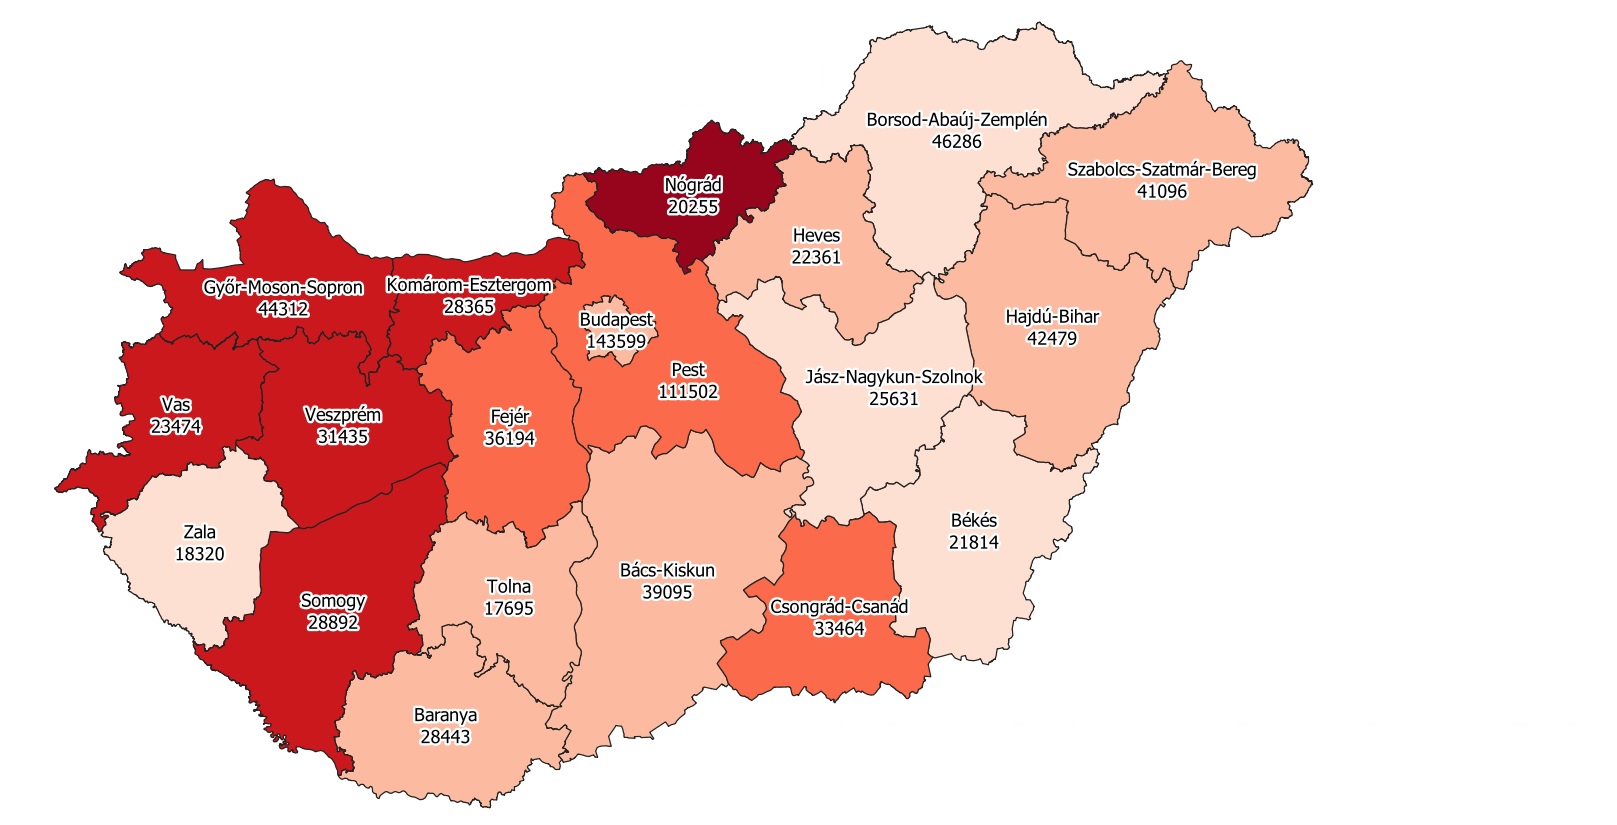 Covid Fatality Rate in Hungary Falls to Five